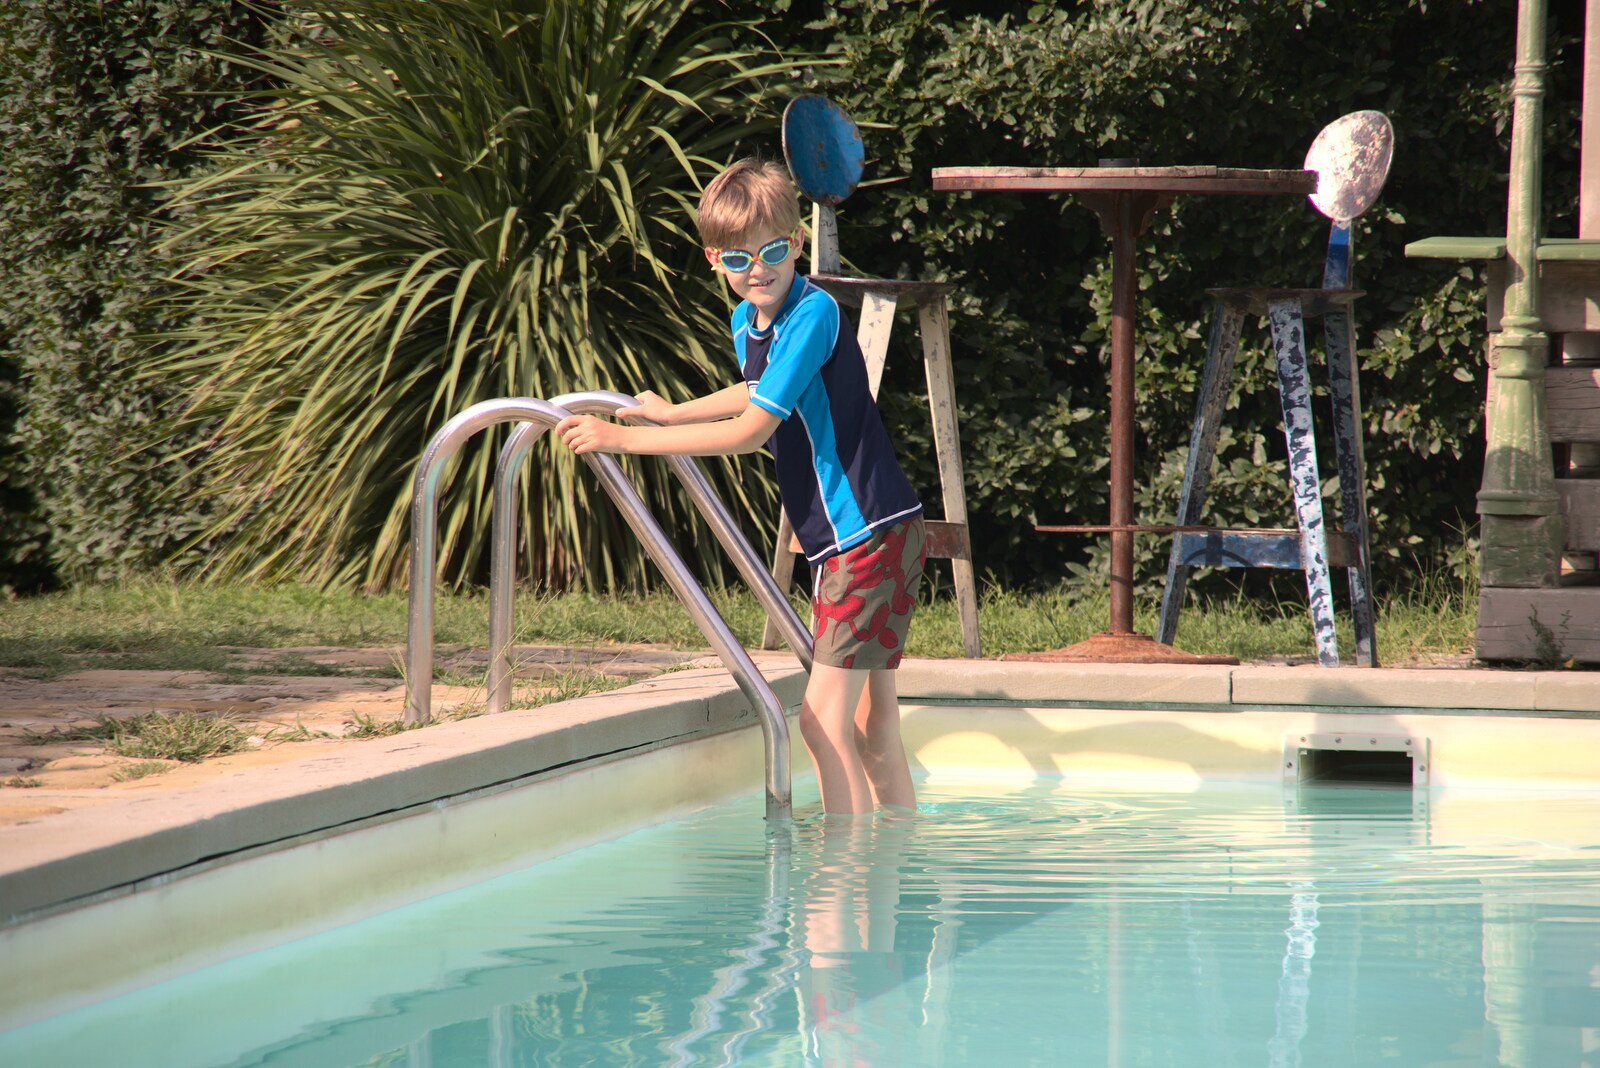 The Flags of Arezzo, Tuscany, Italy - 28th August 2022: Harry tries out the pool for the first time